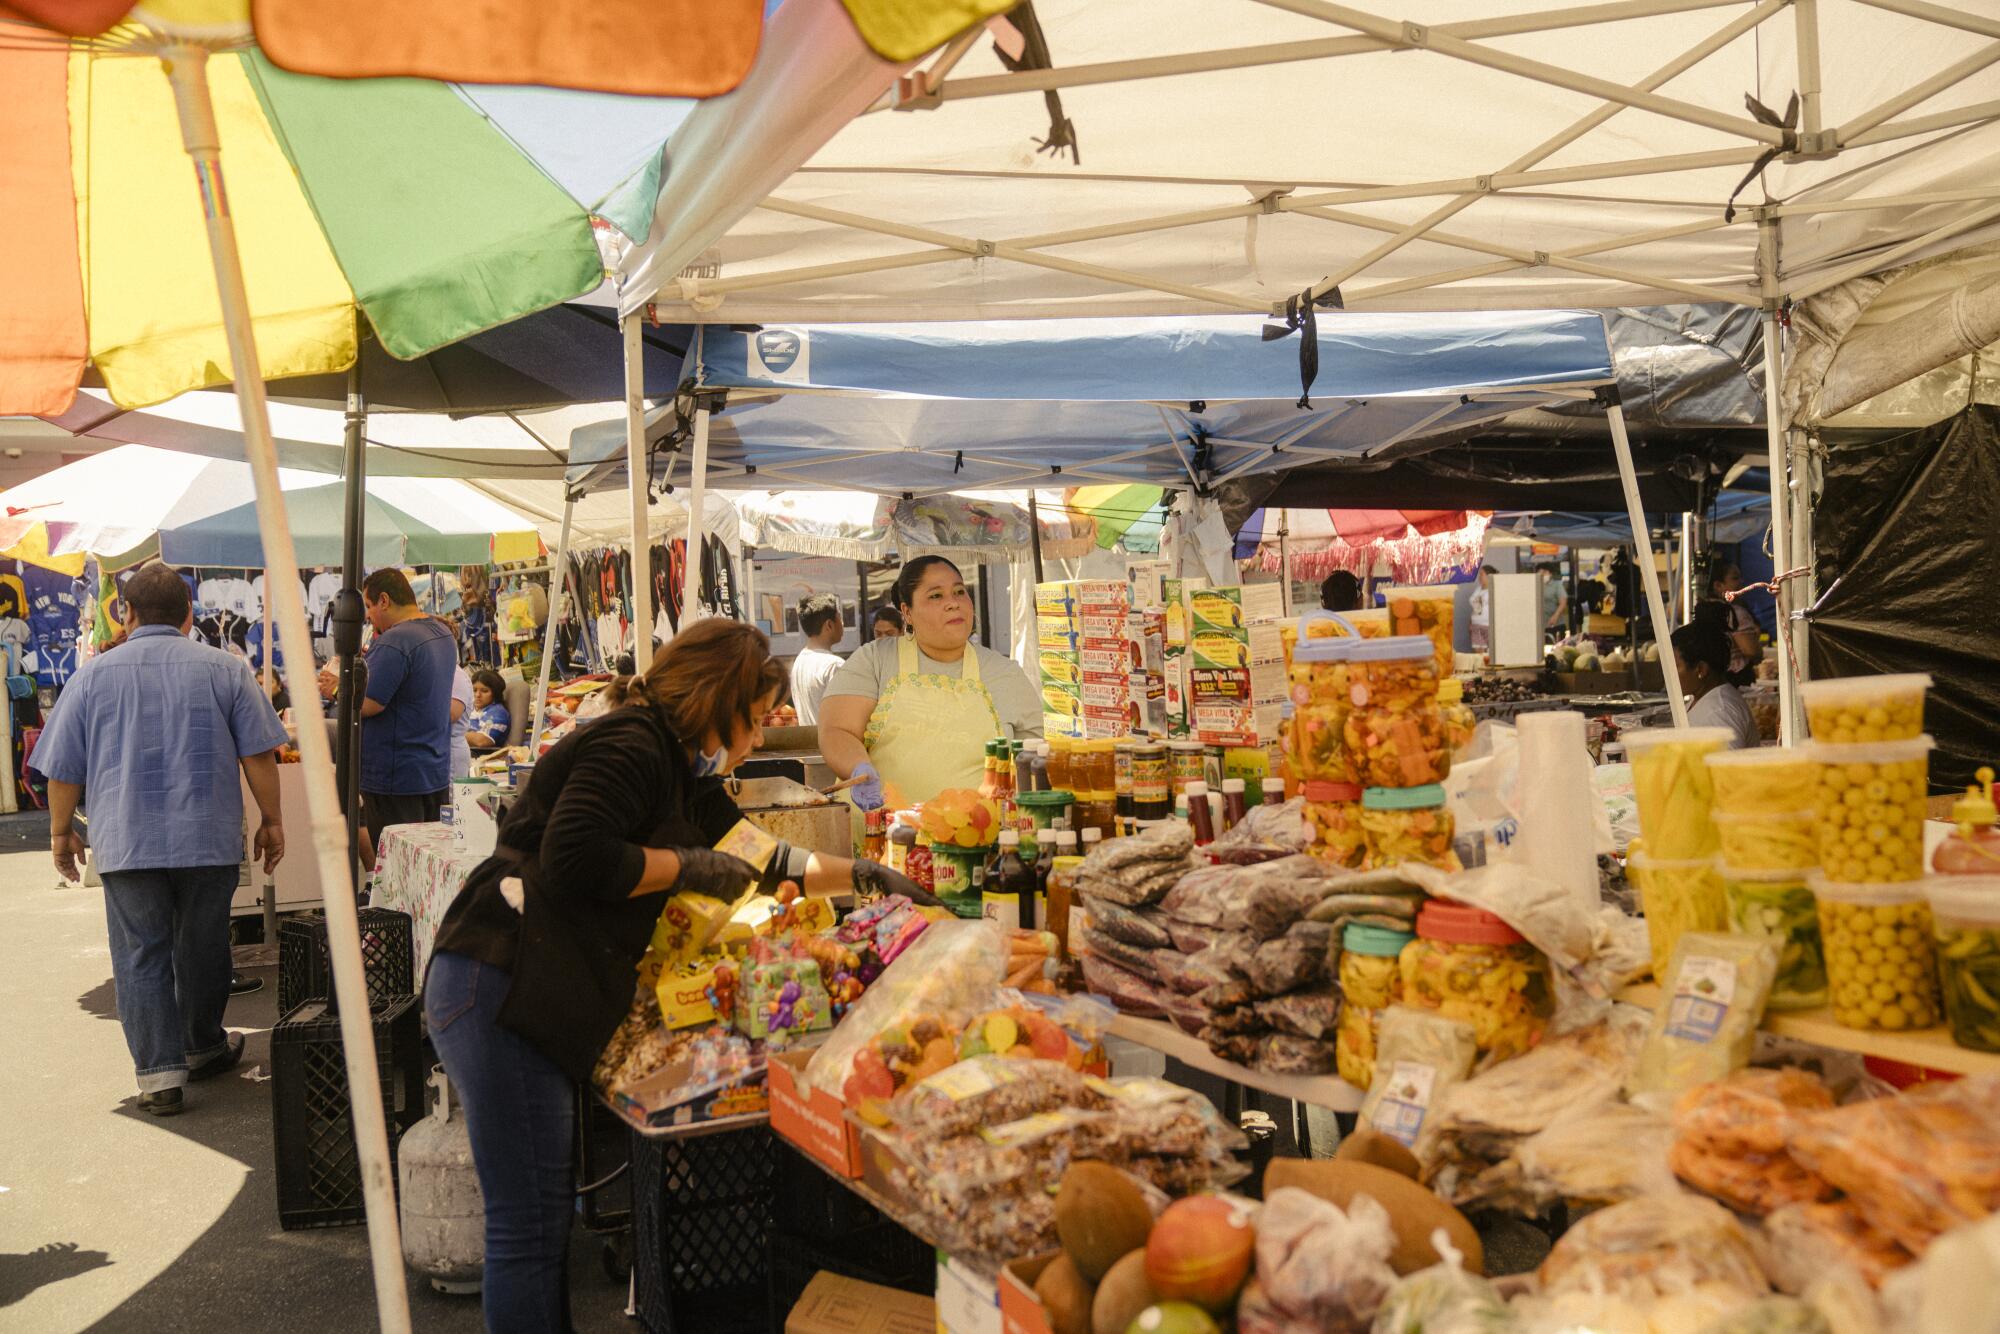 Vendors at the Salvadoran street food market in the parking lot of Two Guys Plaza.